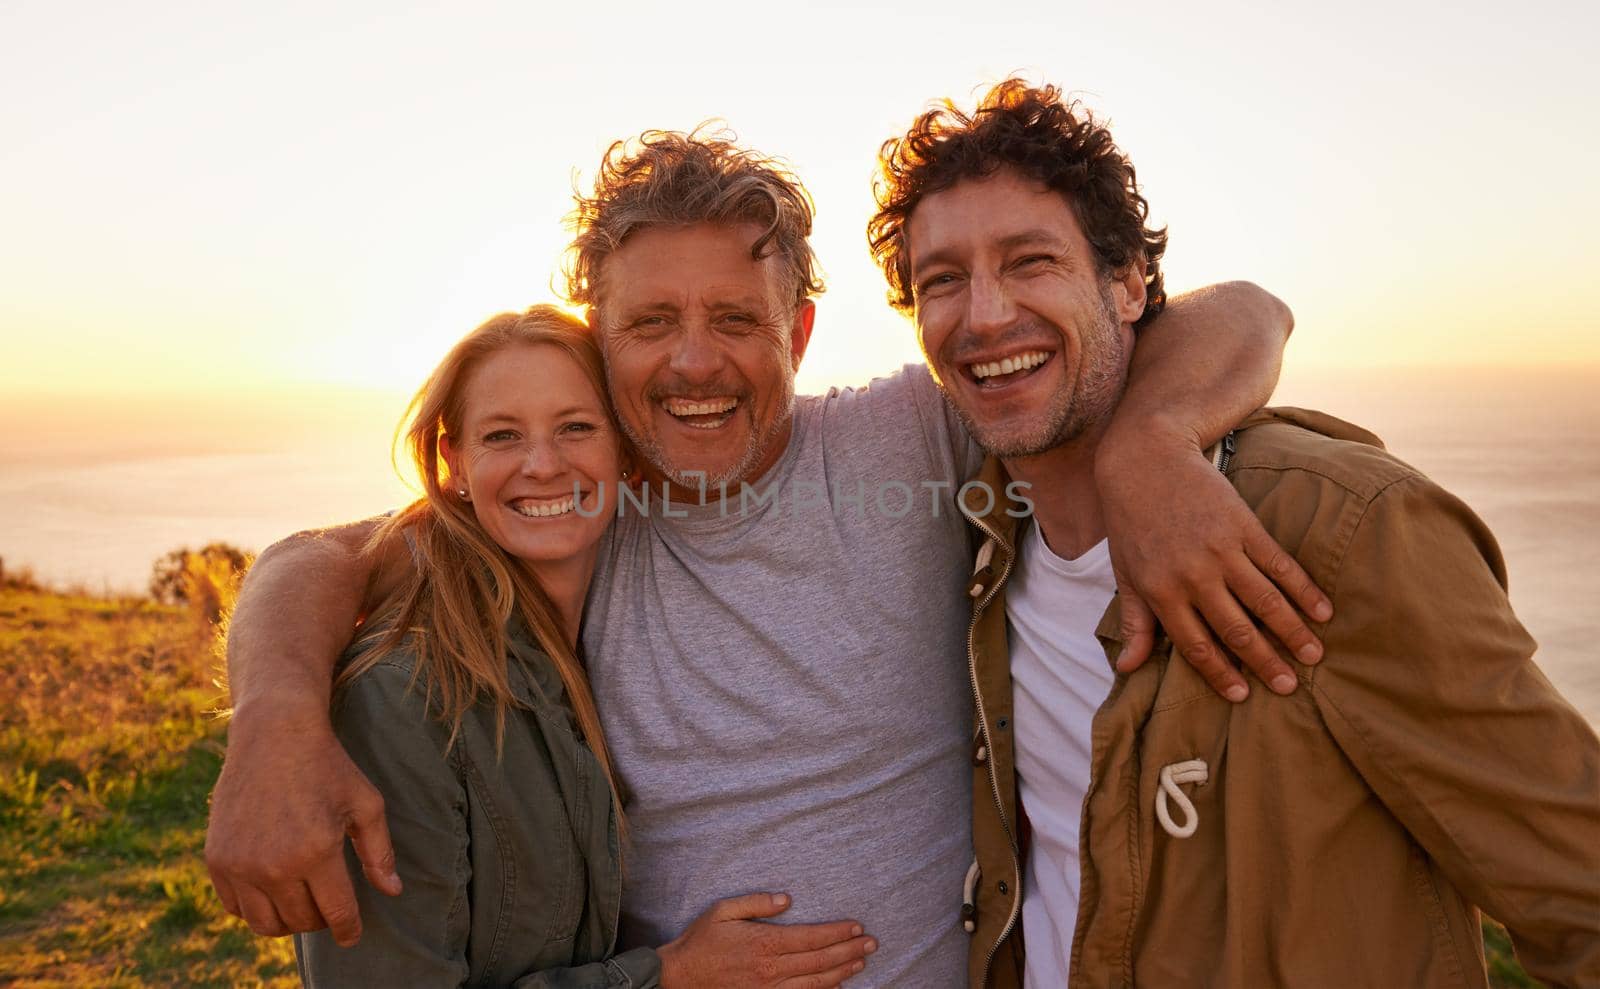 Portrait of a father with his son and daughter on a grassy hill at sunset